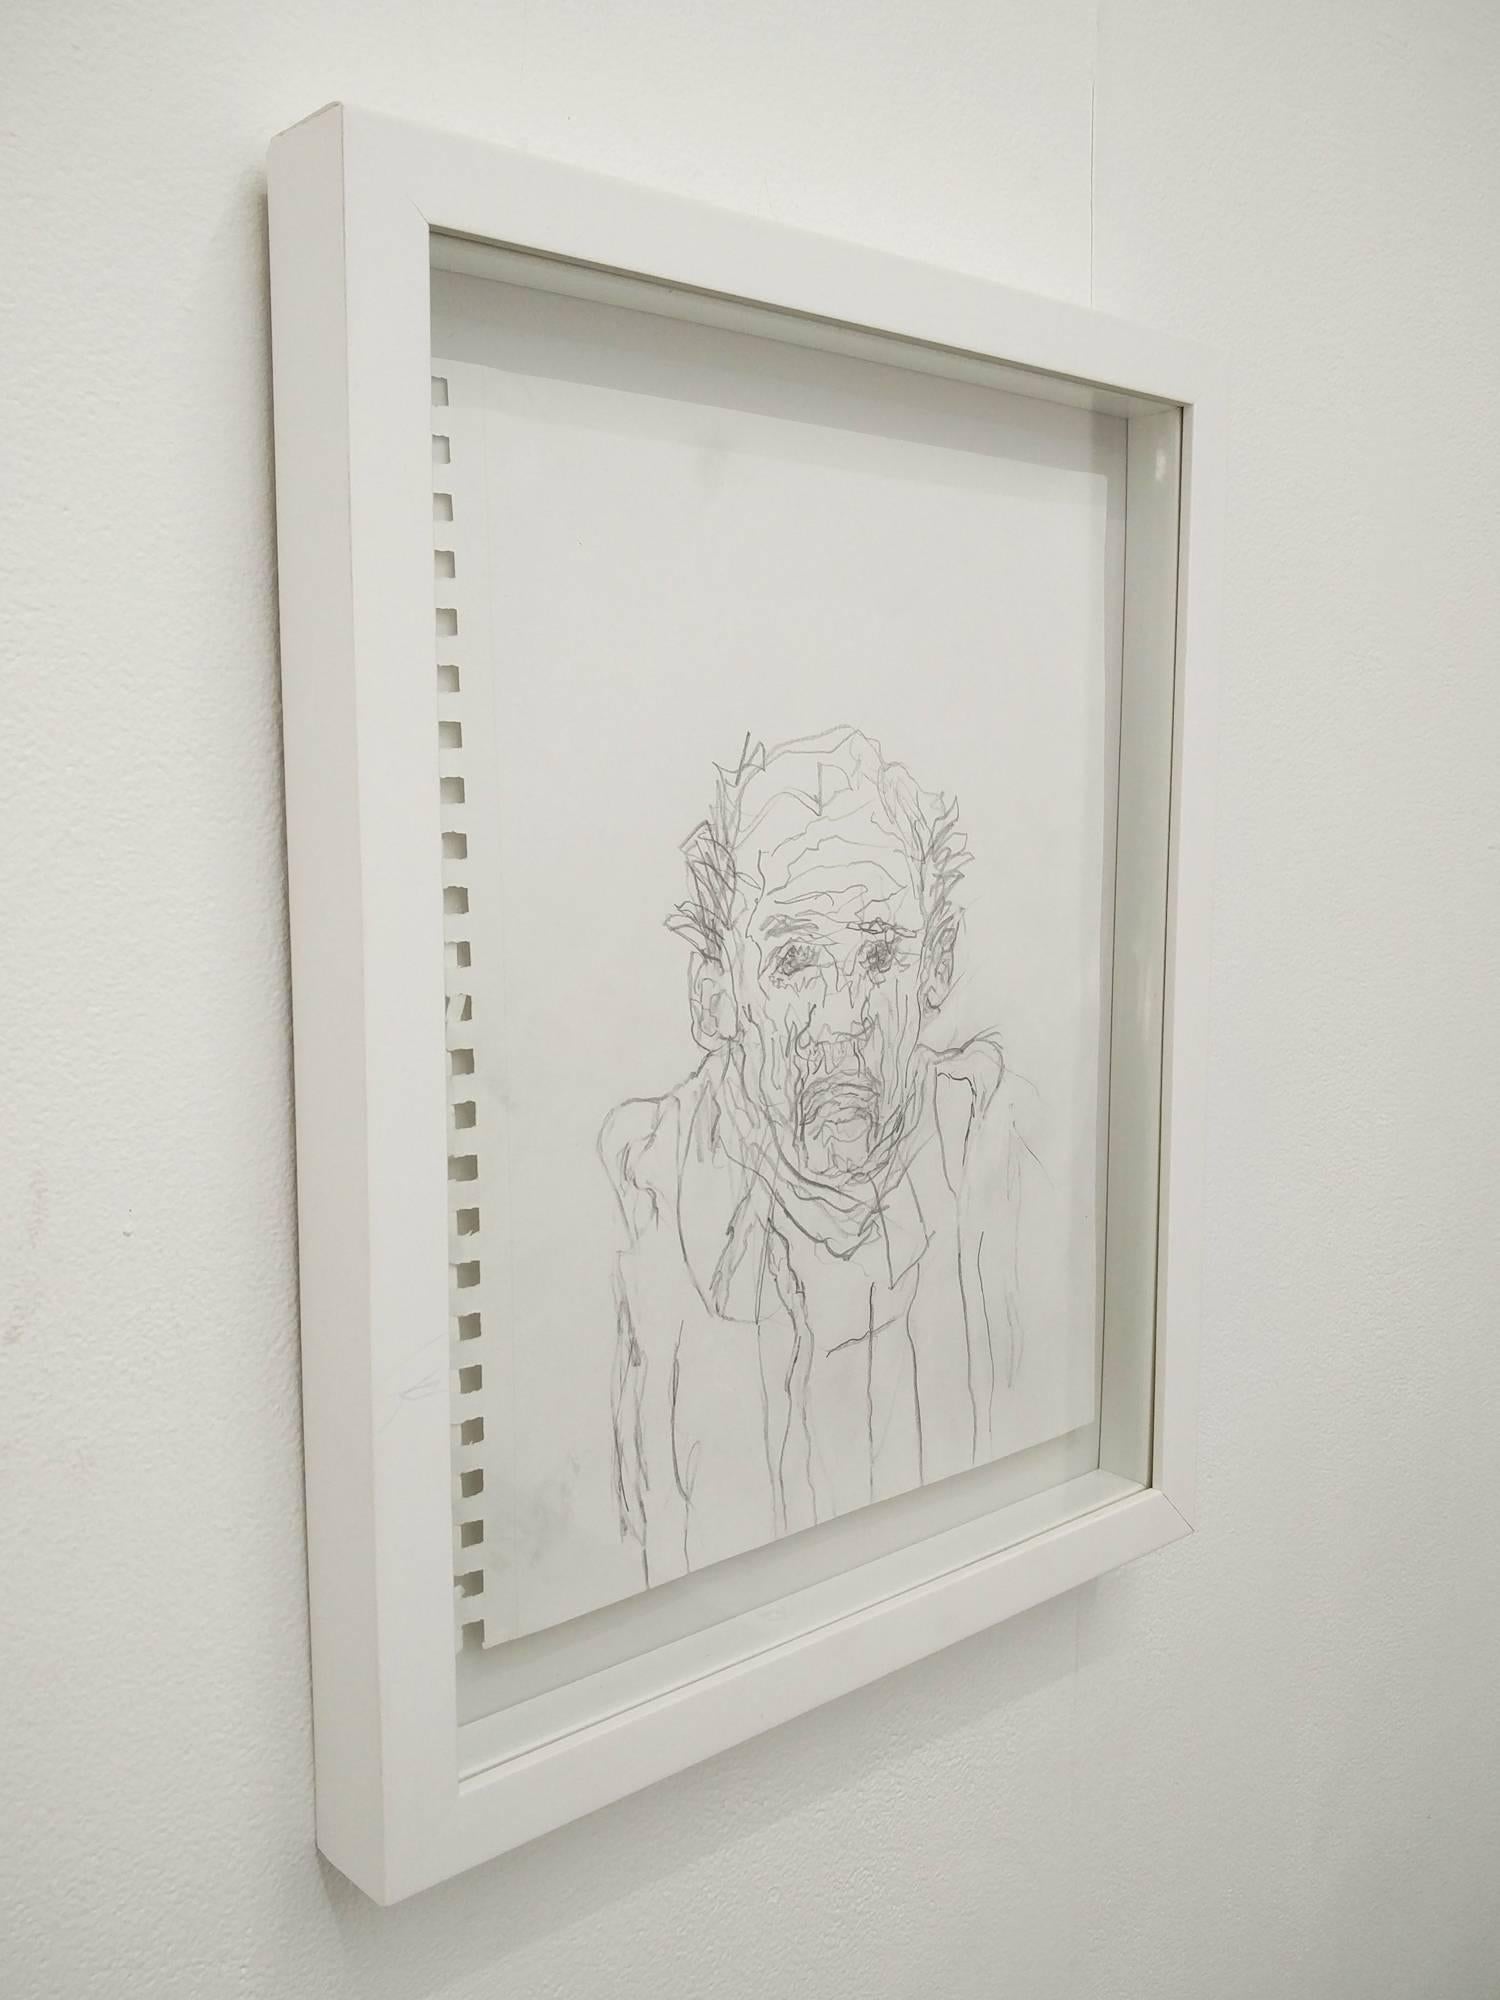 This drawing is from a series of semi-automatic, diary-like drawings (2014 2015), which Vega produced nightly. The drawings, depictions of a single mythical man, also form, together, a shifting, serial self-portrait.

Vega once said: “They all look